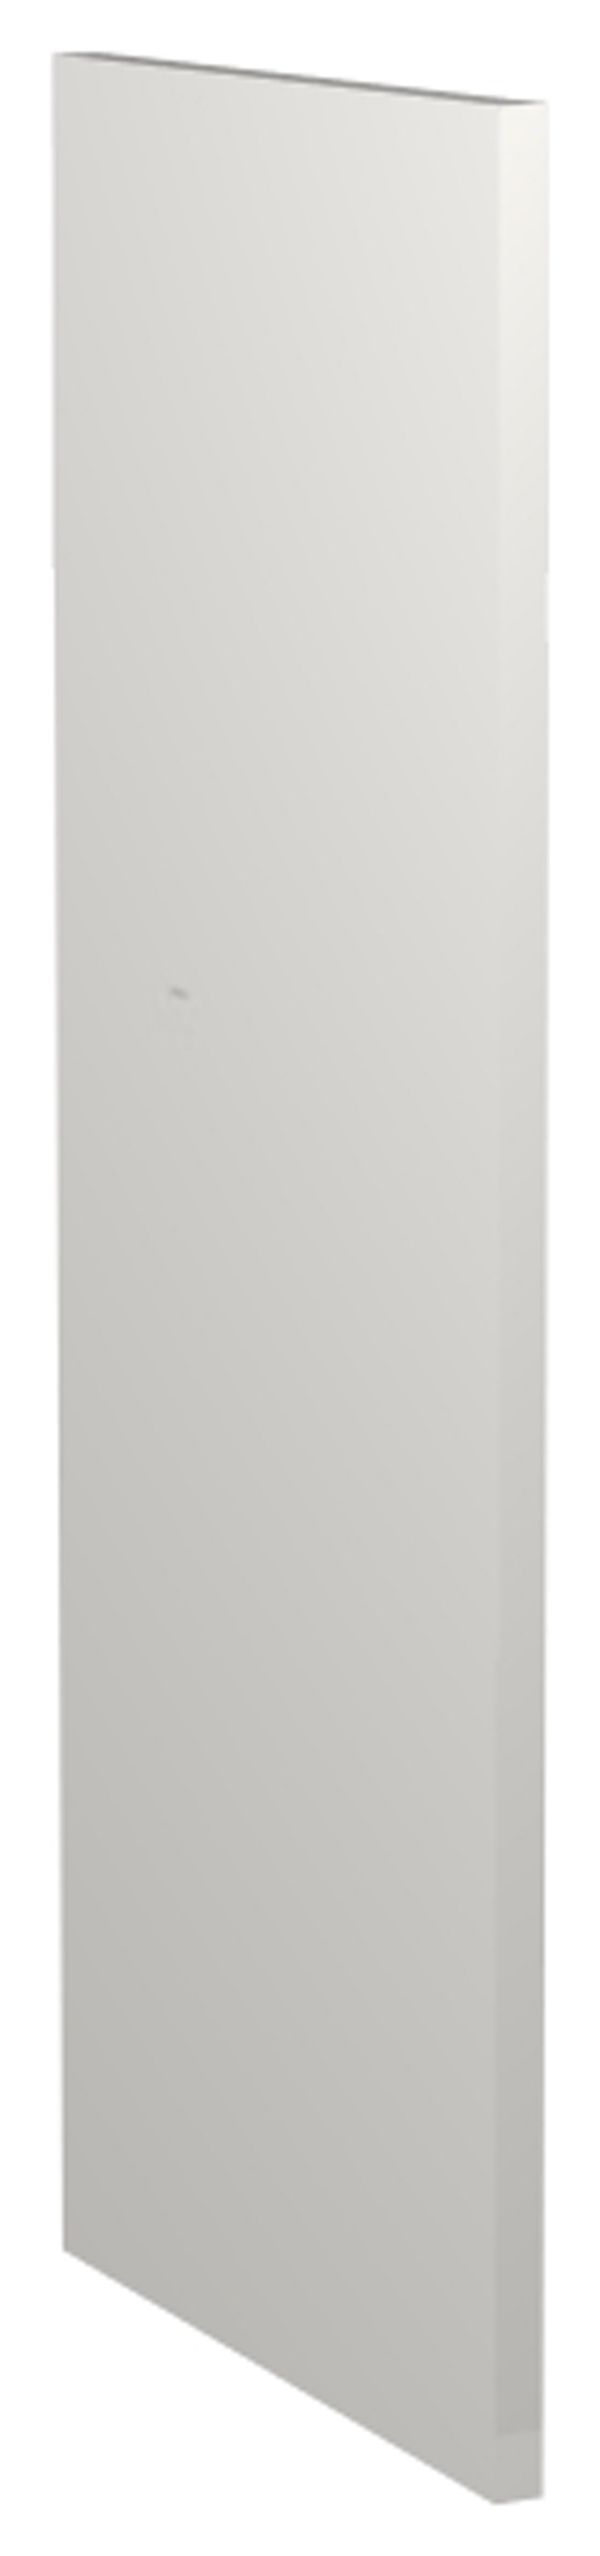 Wickes Vermont Grey Wall Decor End Panel - 18mm